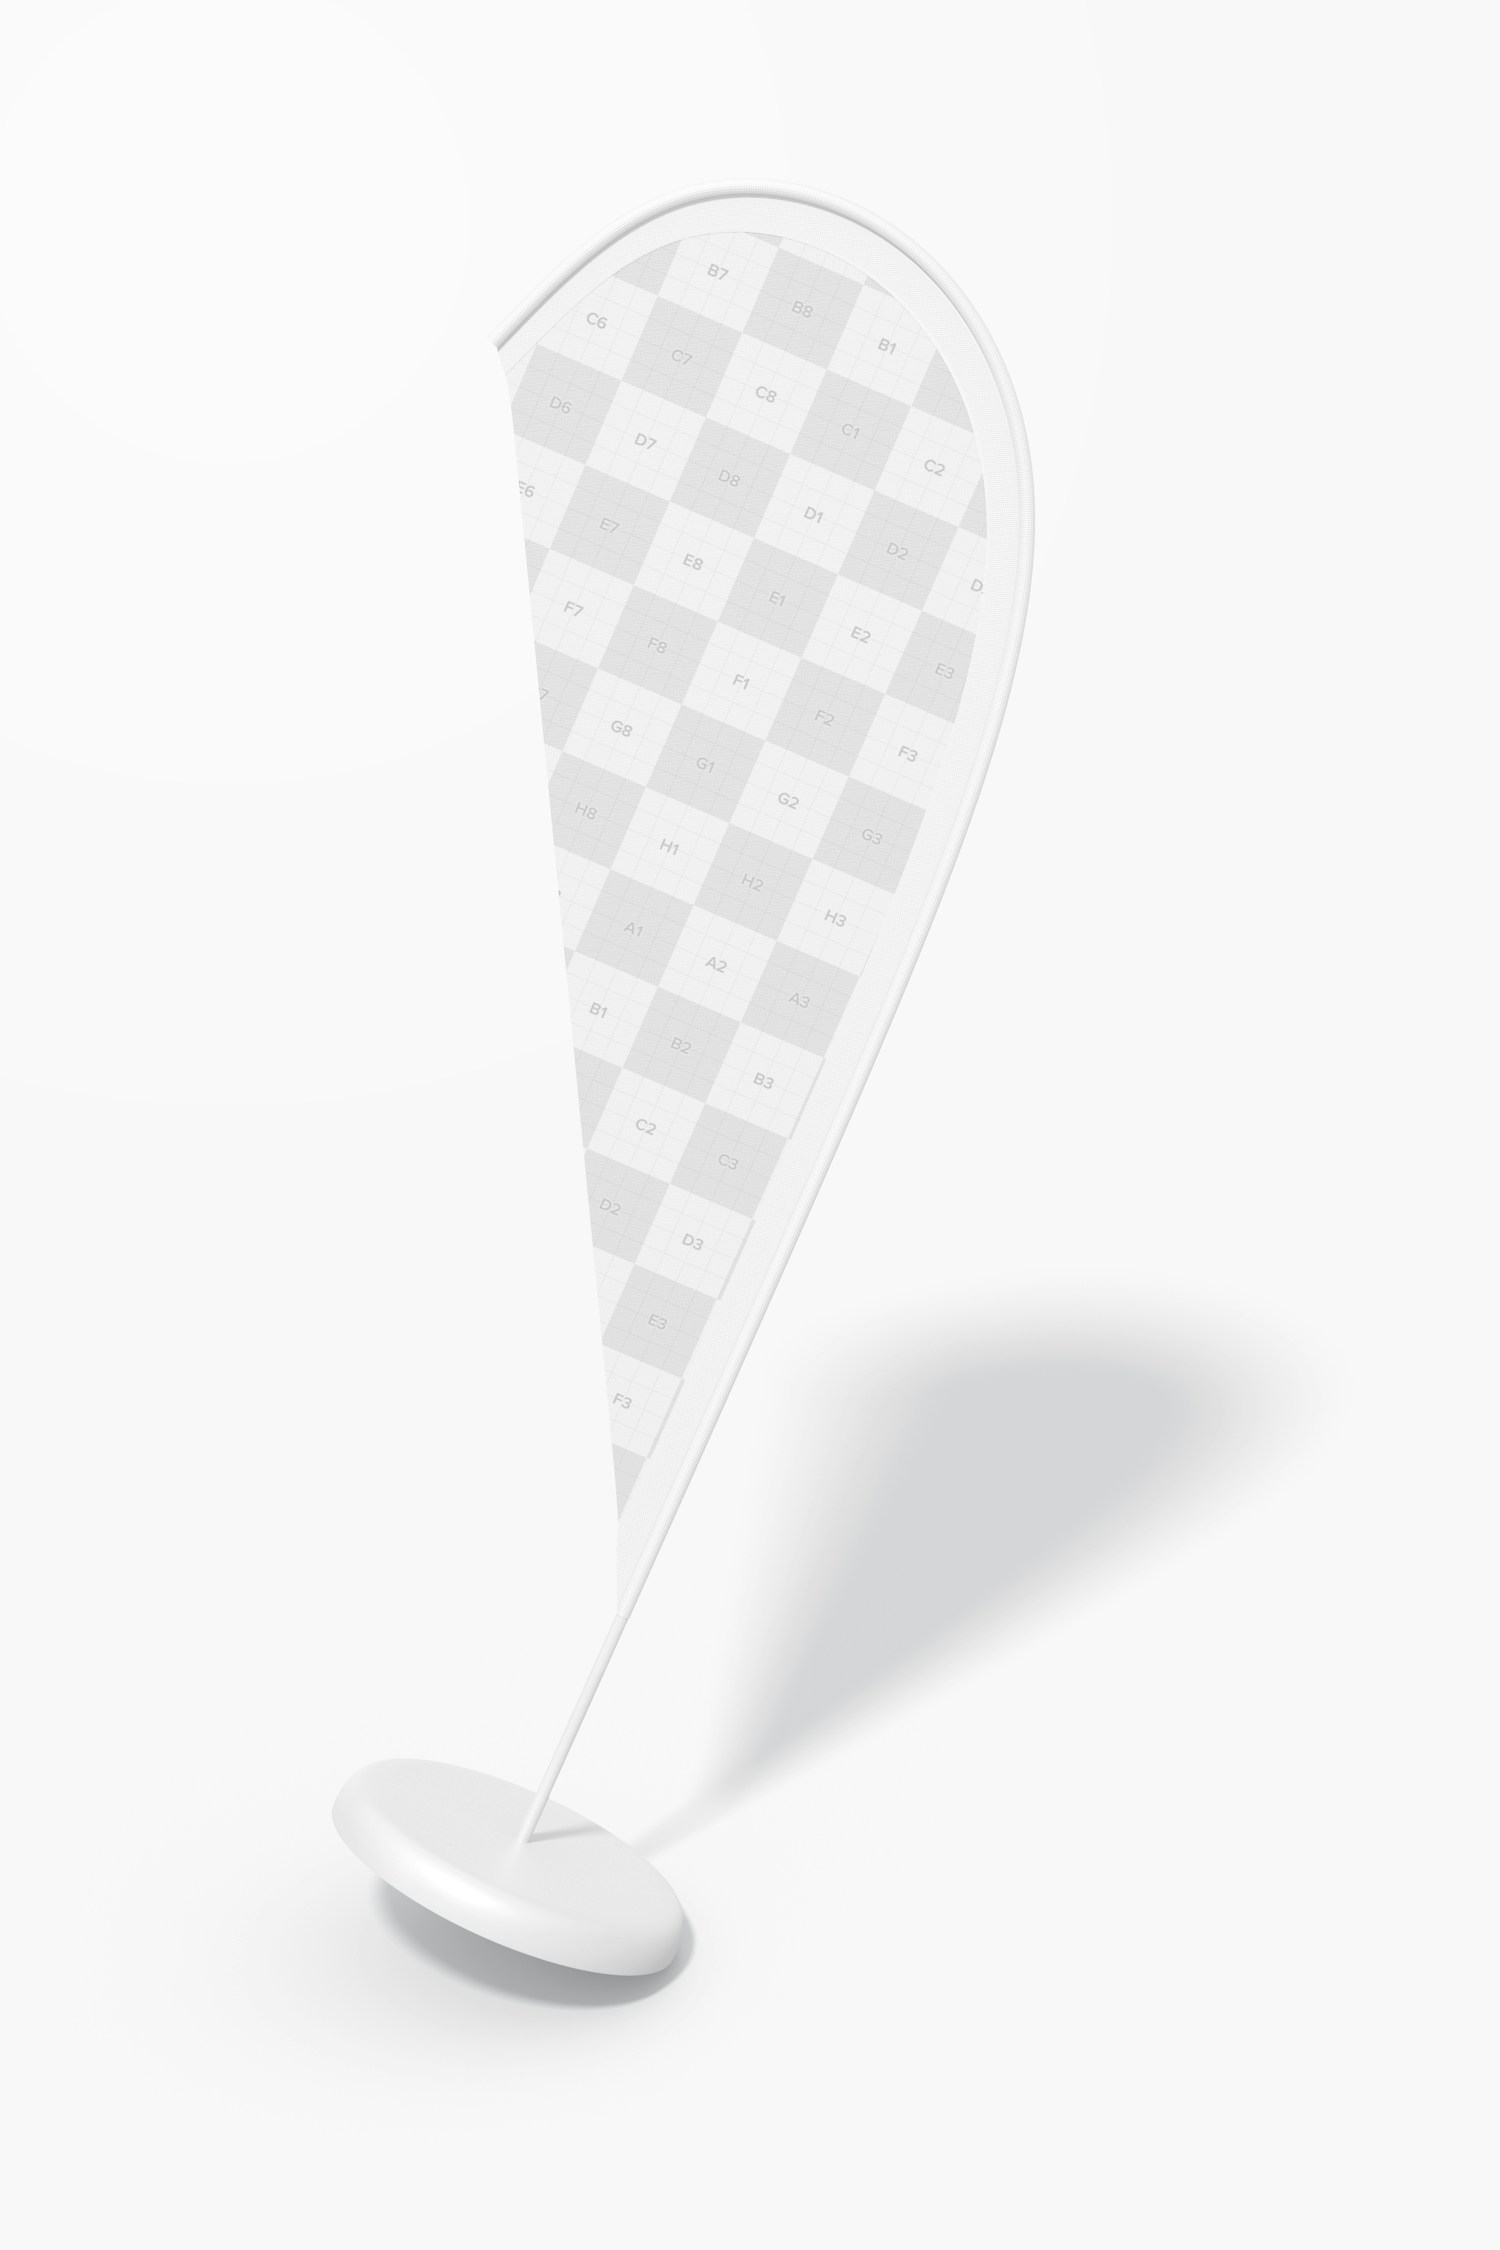 Feather Flag Banner Mockup, Leaned